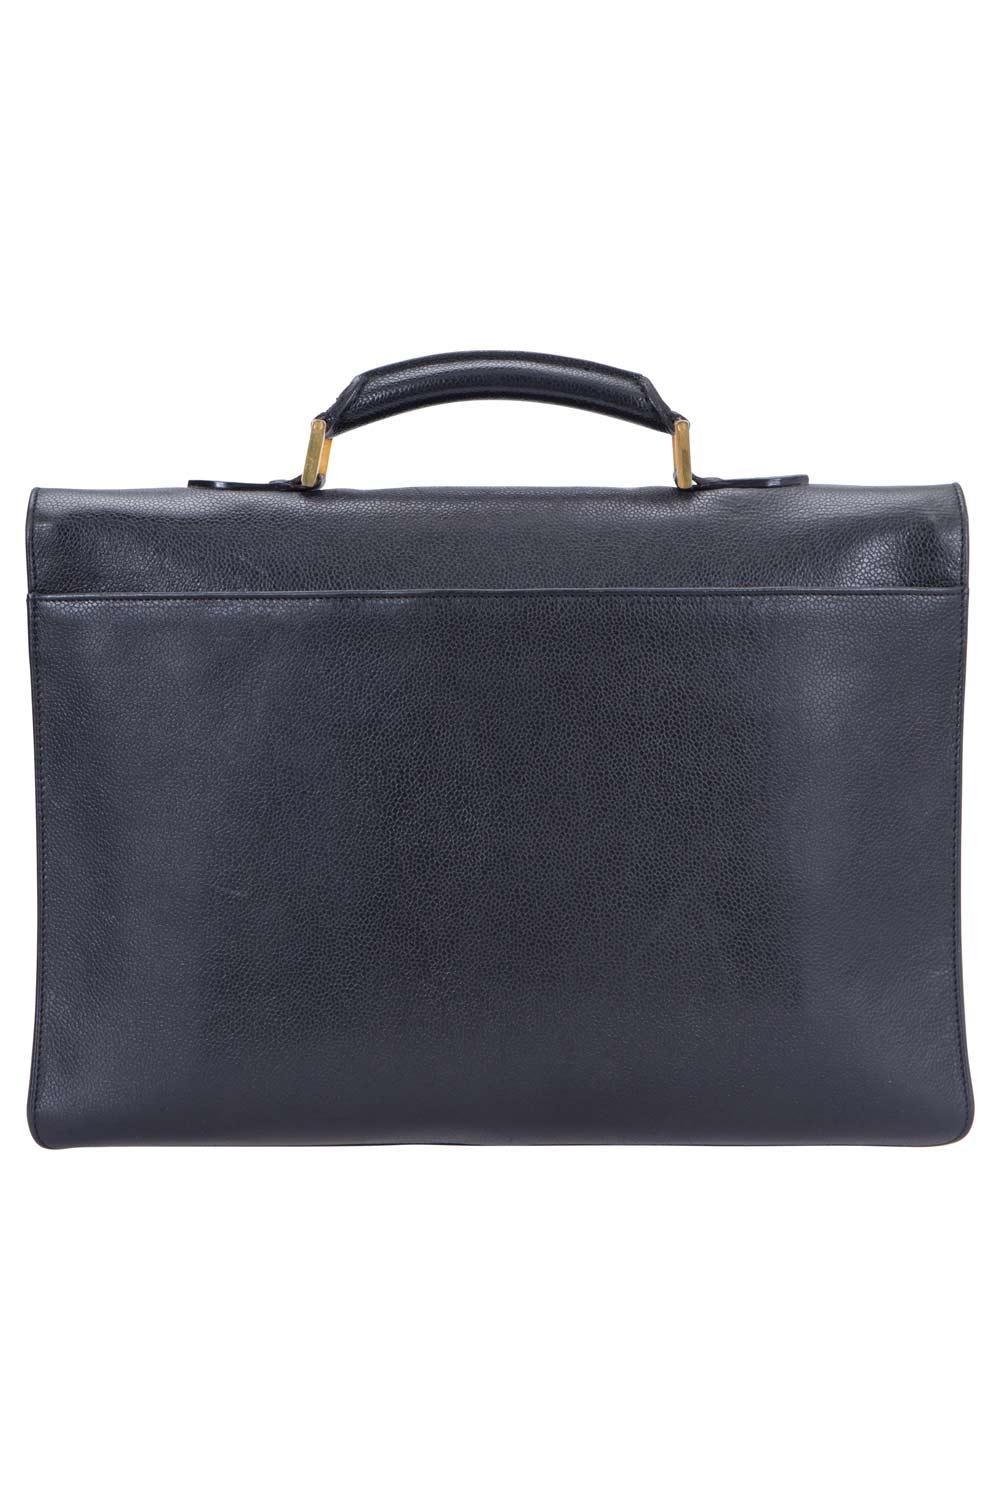 This Chanel briefcase has been designed to keep your office documents and laptop safe. Beautifully crafted from Caviar leather in black and designed with a gold-tone lock at the front flap, this bag is smart and sophisticated. It boasts of a